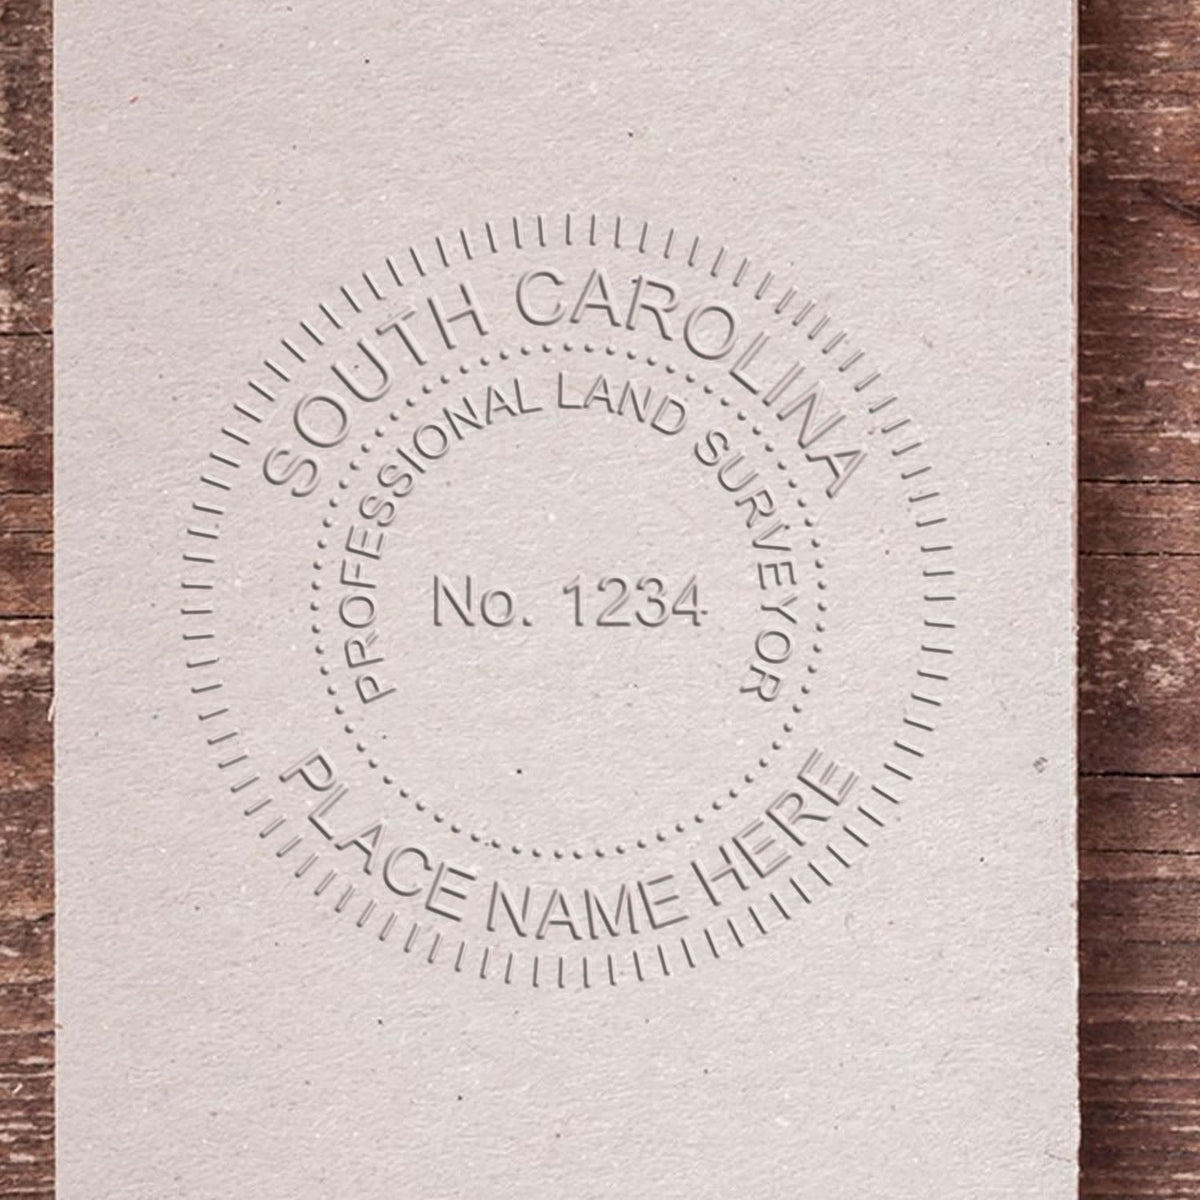 A photograph of the State of South Carolina Soft Land Surveyor Embossing Seal stamp impression reveals a vivid, professional image of the on paper.